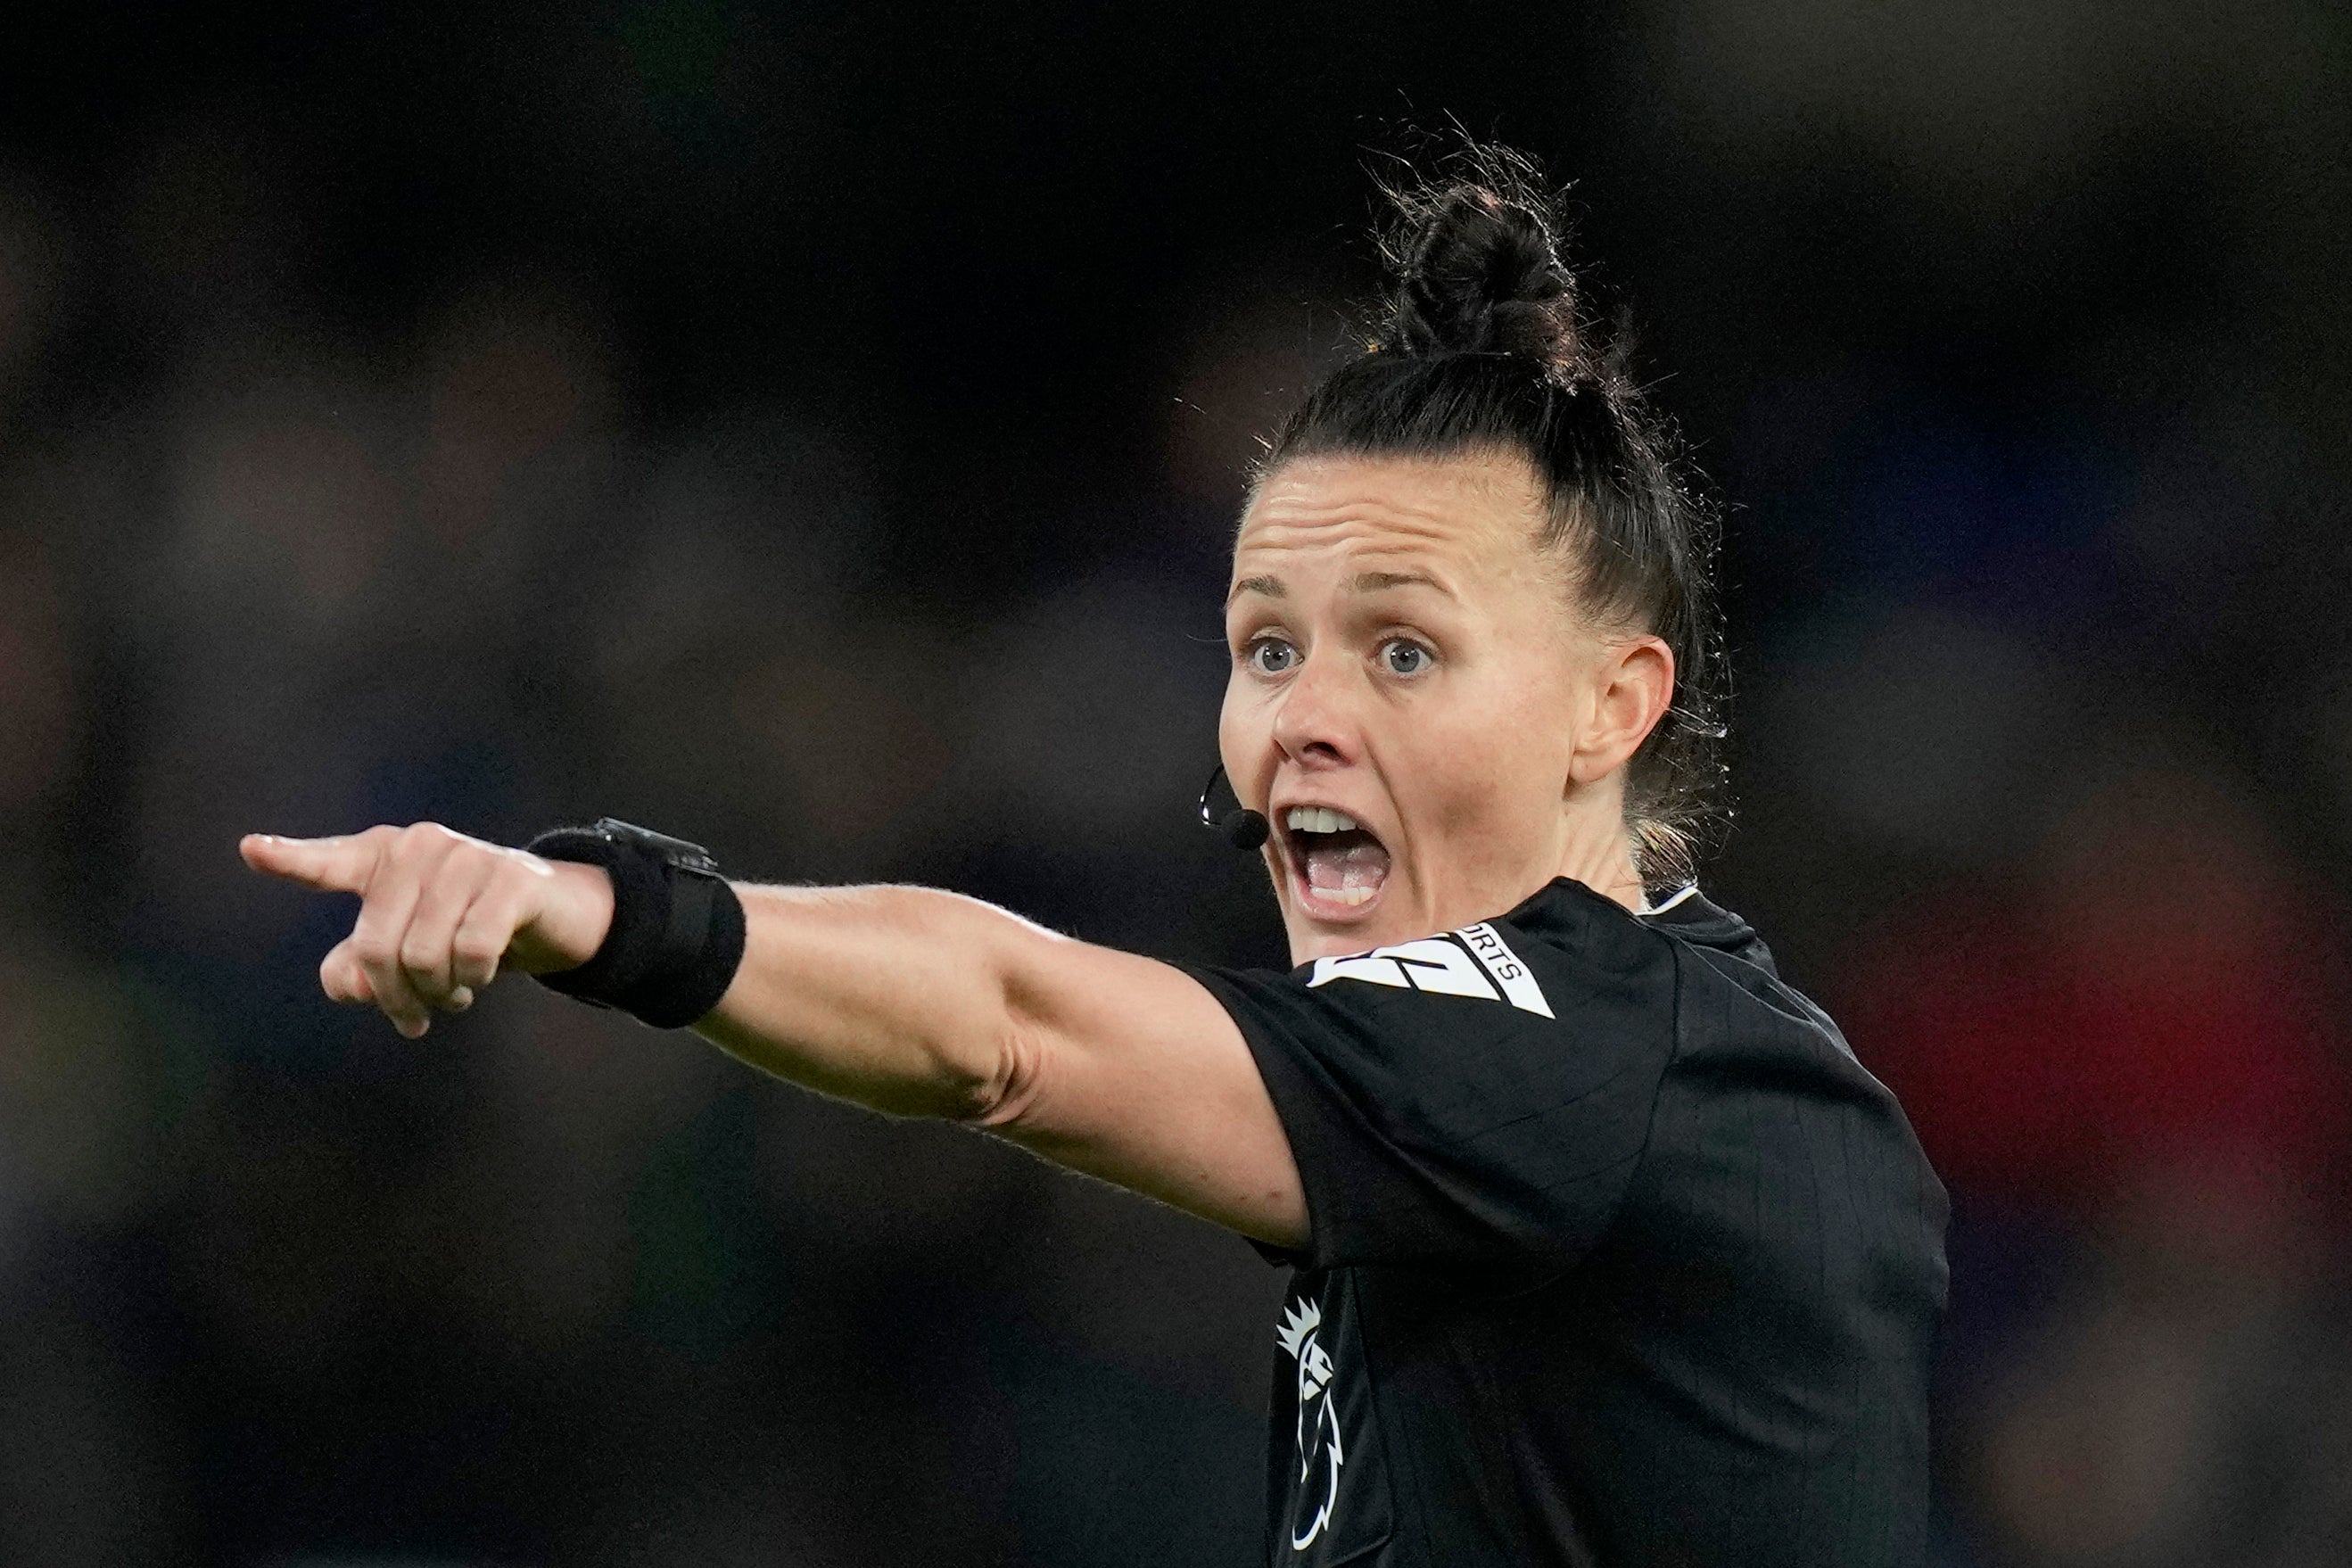 Rebecca Welch made history when she became the first female referee of a men’s Premier League match